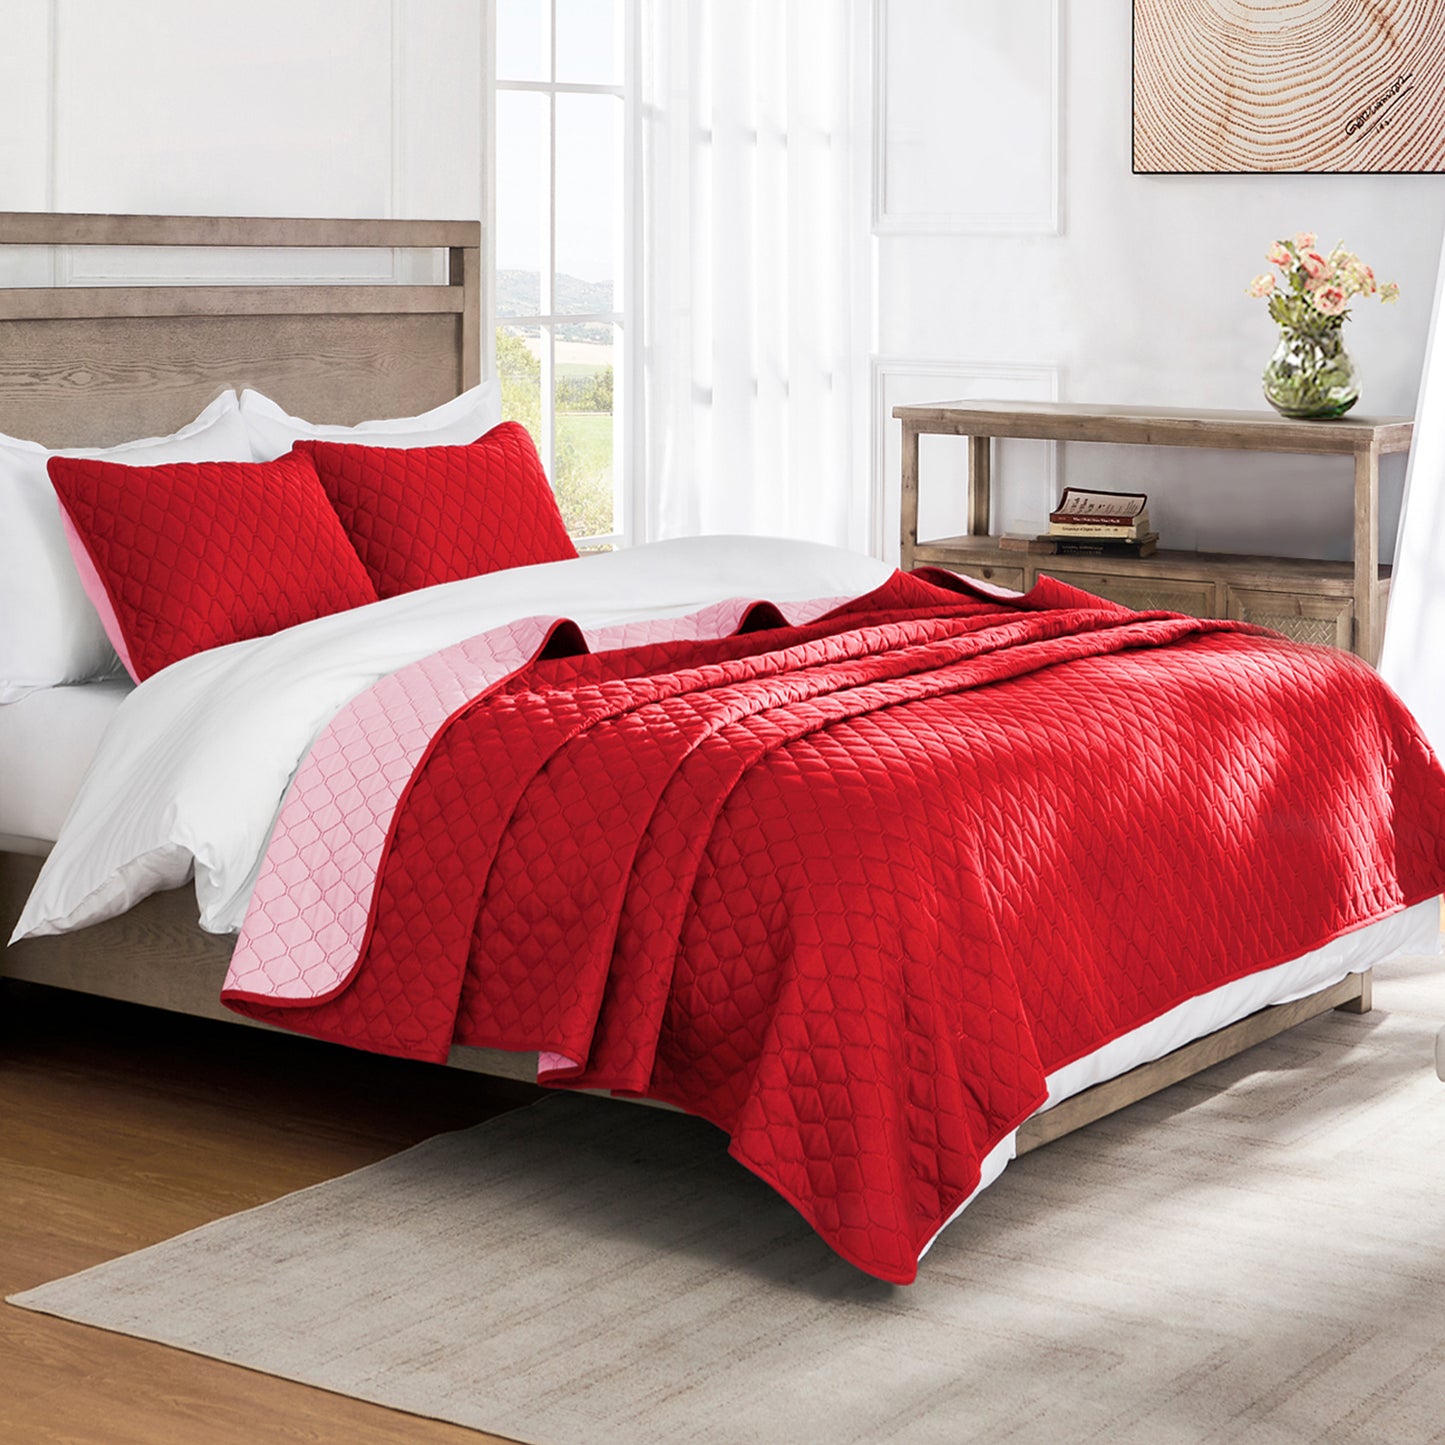 Exclusivo Mezcla California King Quilt Bedding Set with Pillow Shams, Lightweight Quilts Cal Oversized King Size, Soft Bedspreads Bed Coverlets for All Seasons - (Red, 112"x104")